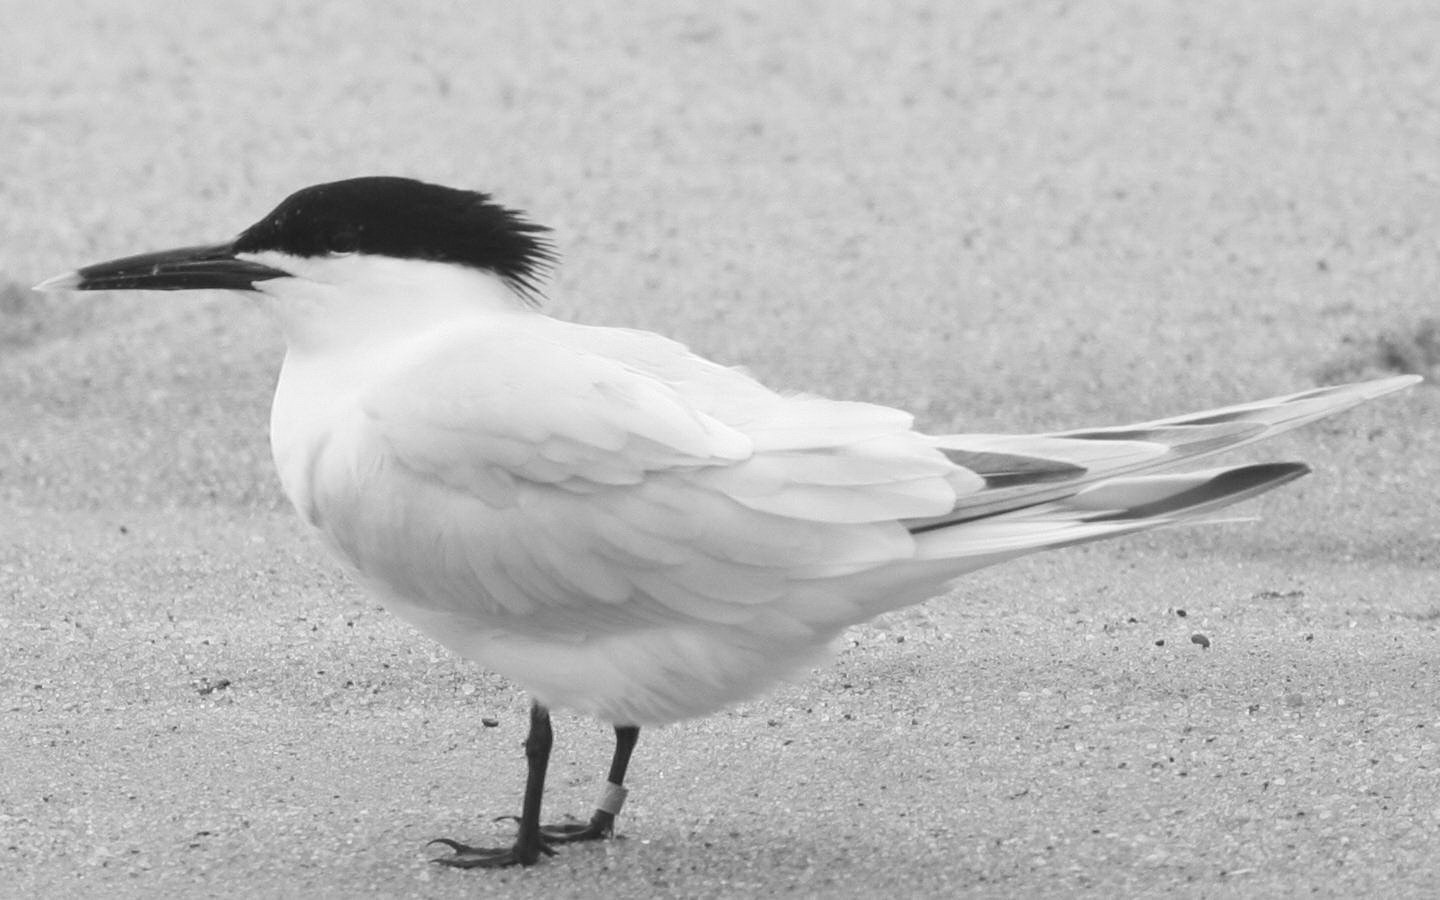 A Sandwich Tern like this one was seen at Great Point last Wednesday.